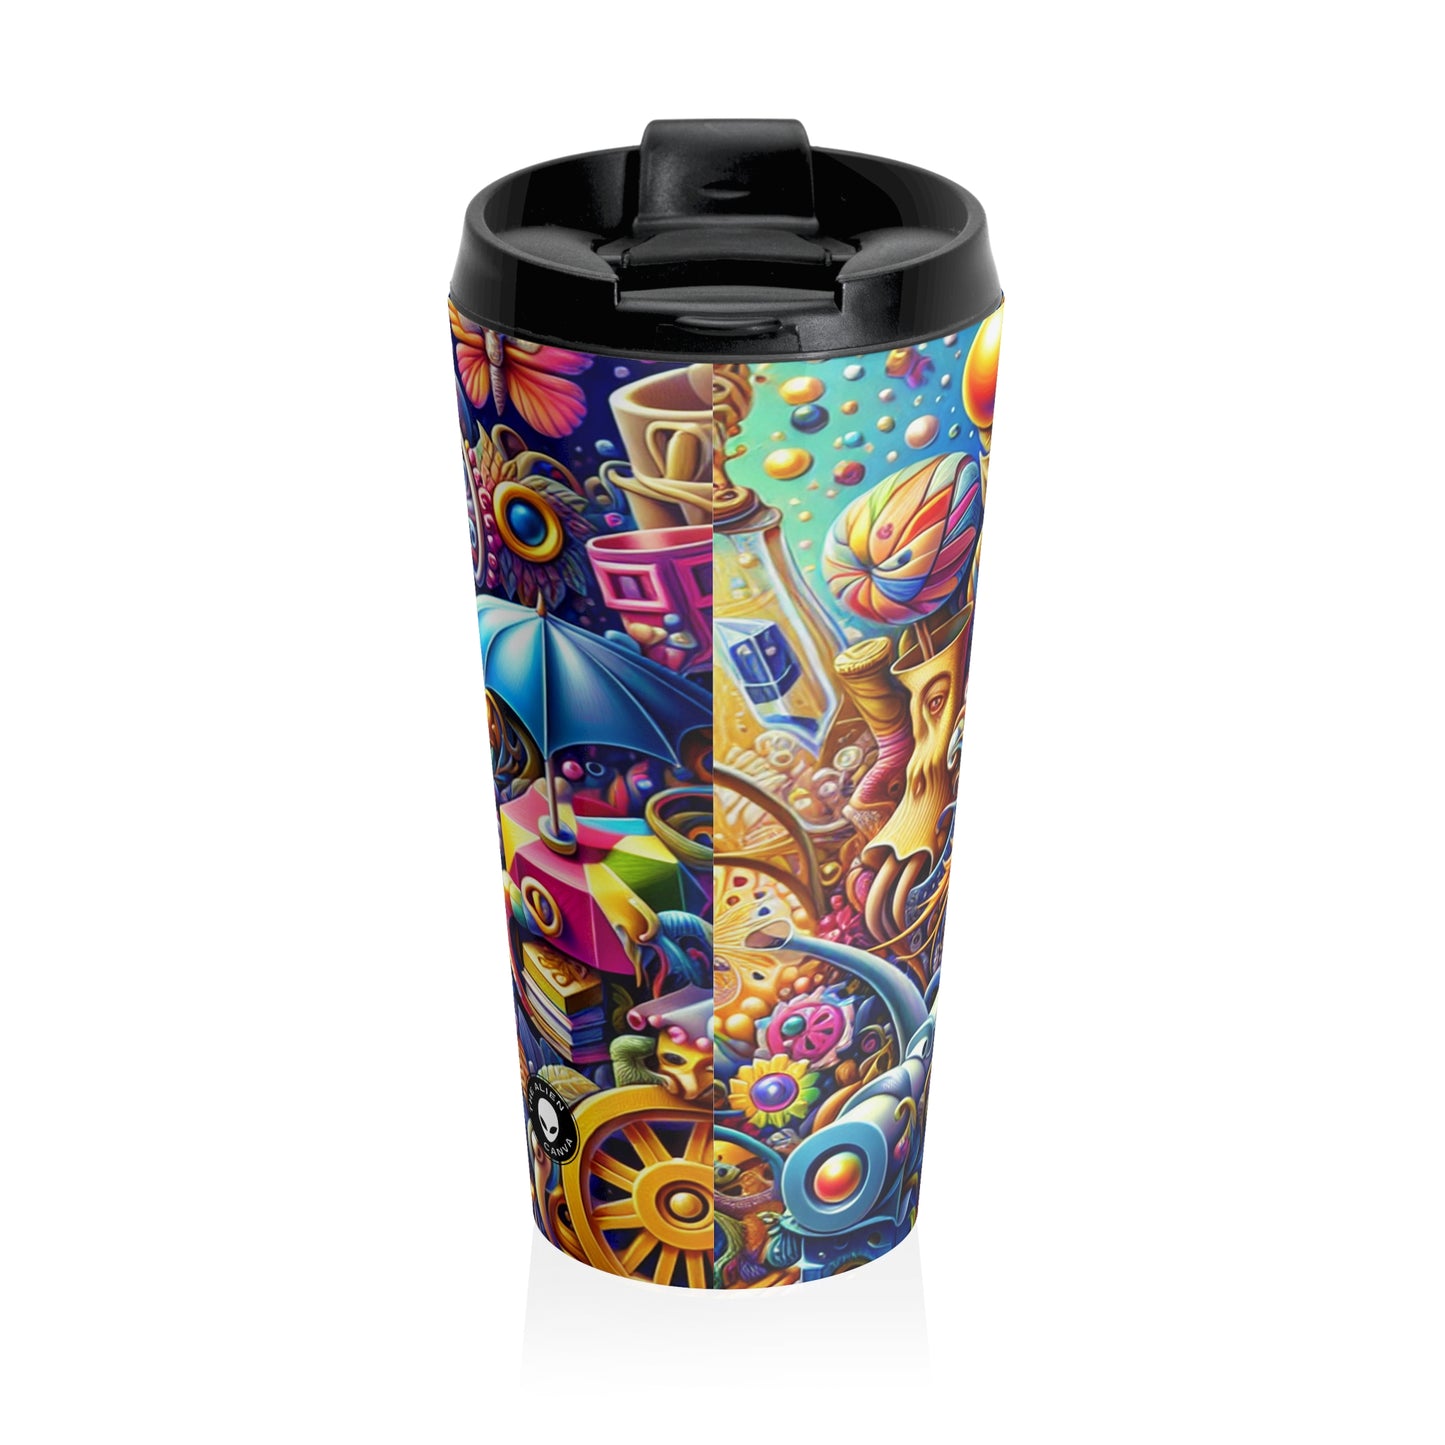 "Cityscape Dreams: A Surreal Night Scene" - The Alien Stainless Steel Travel Mug Magic Realism